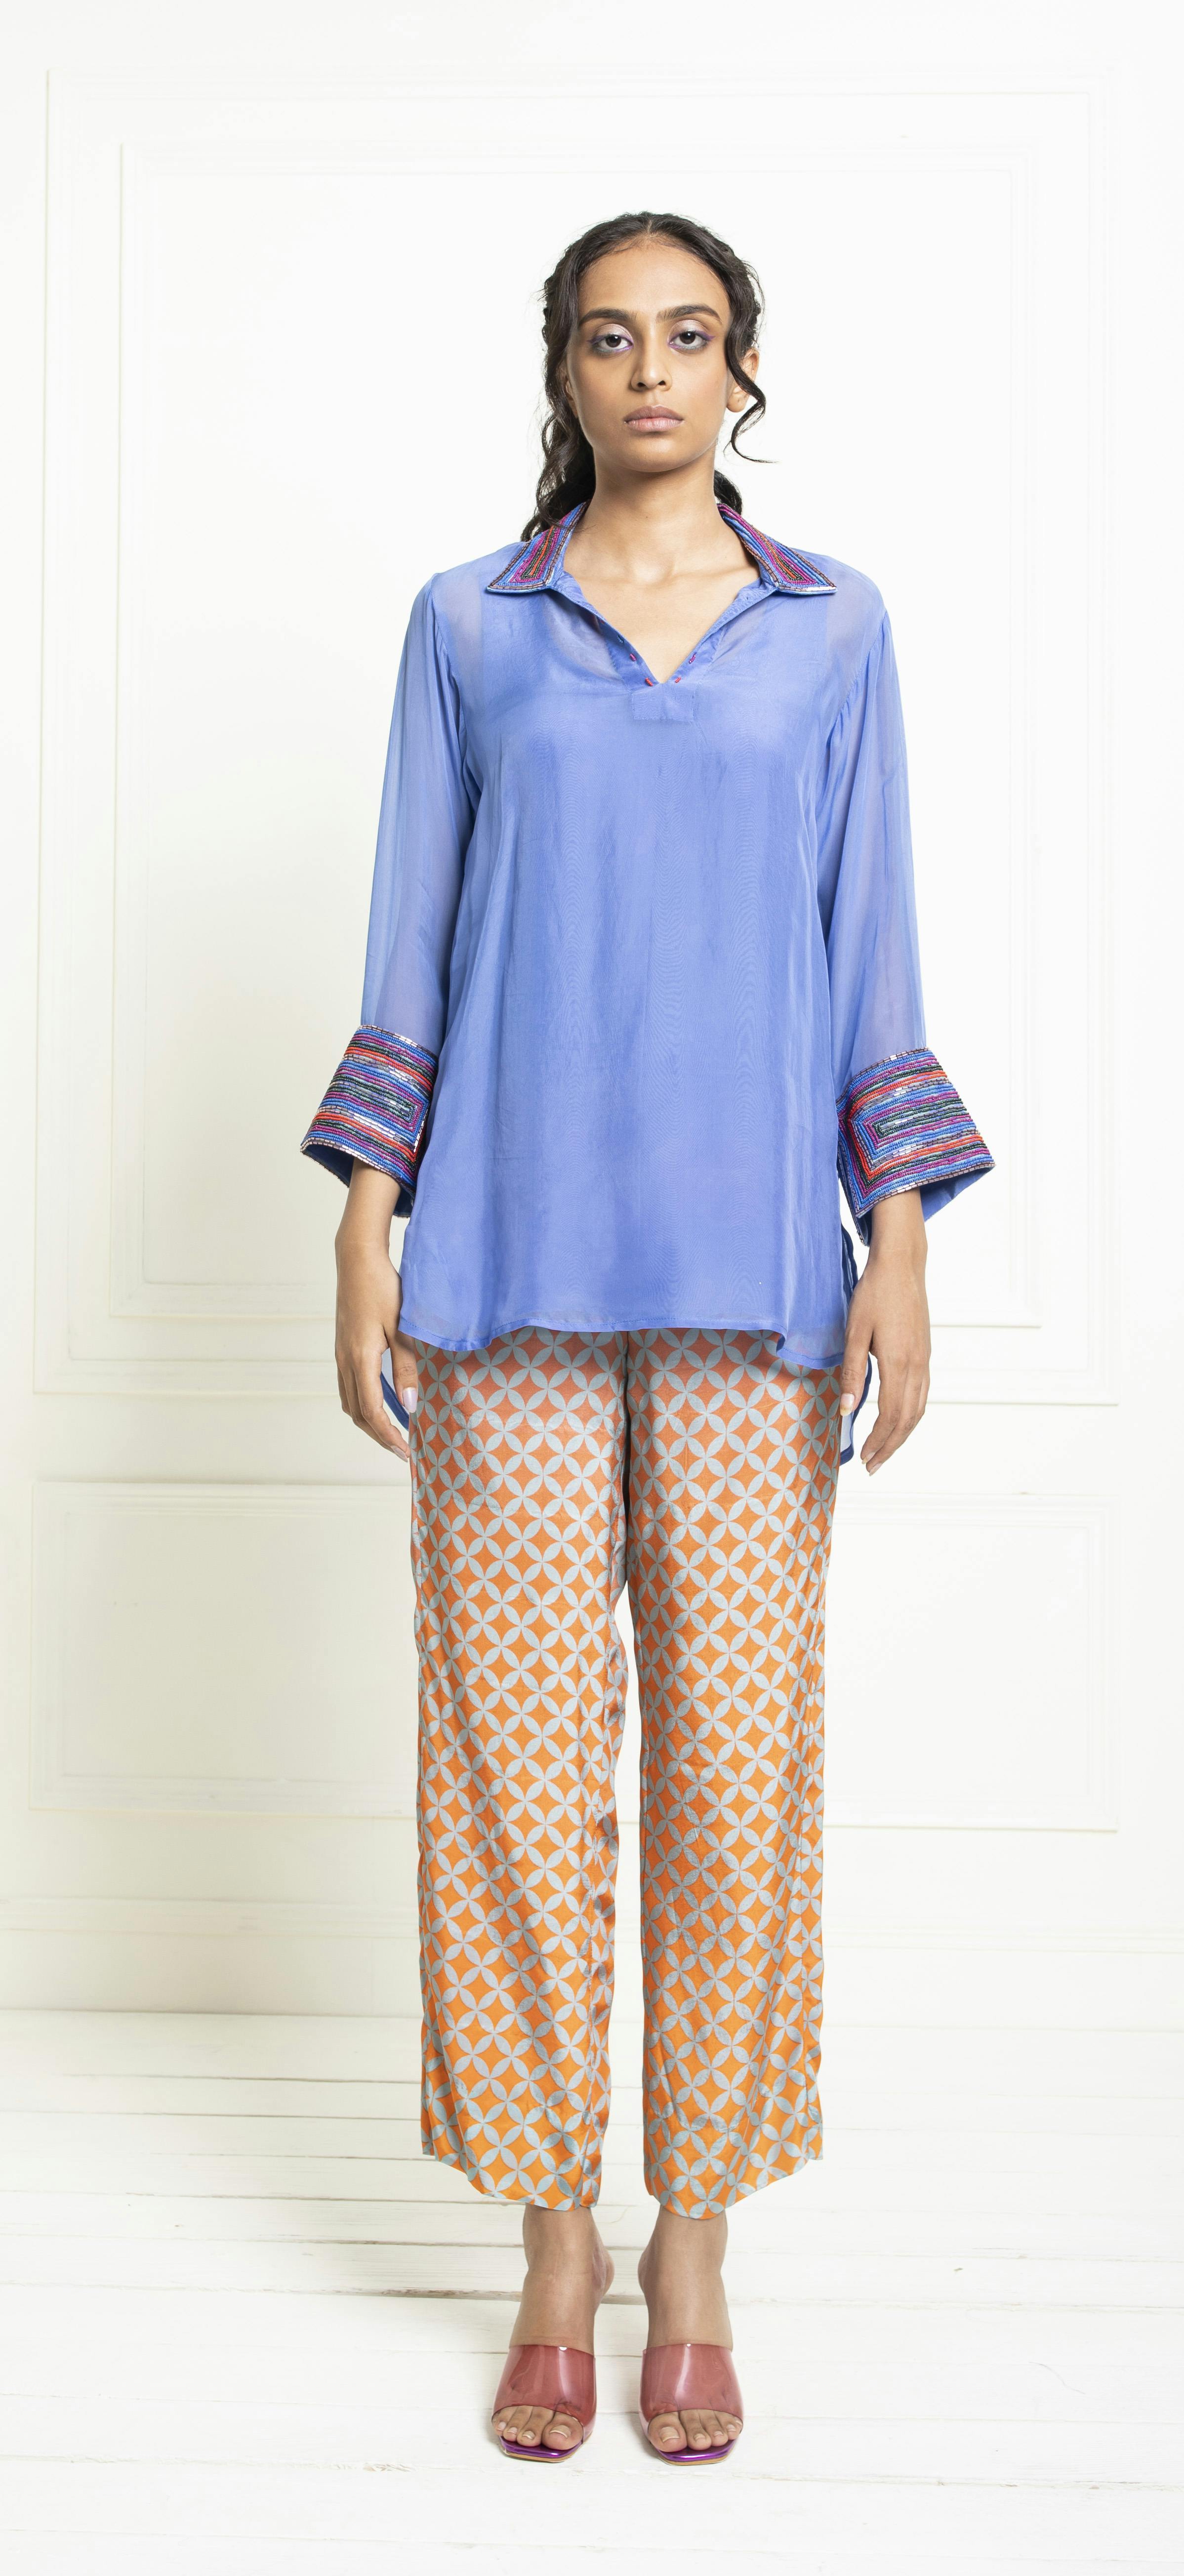 Organza shirt with printed pants, a product by Allagi Studio